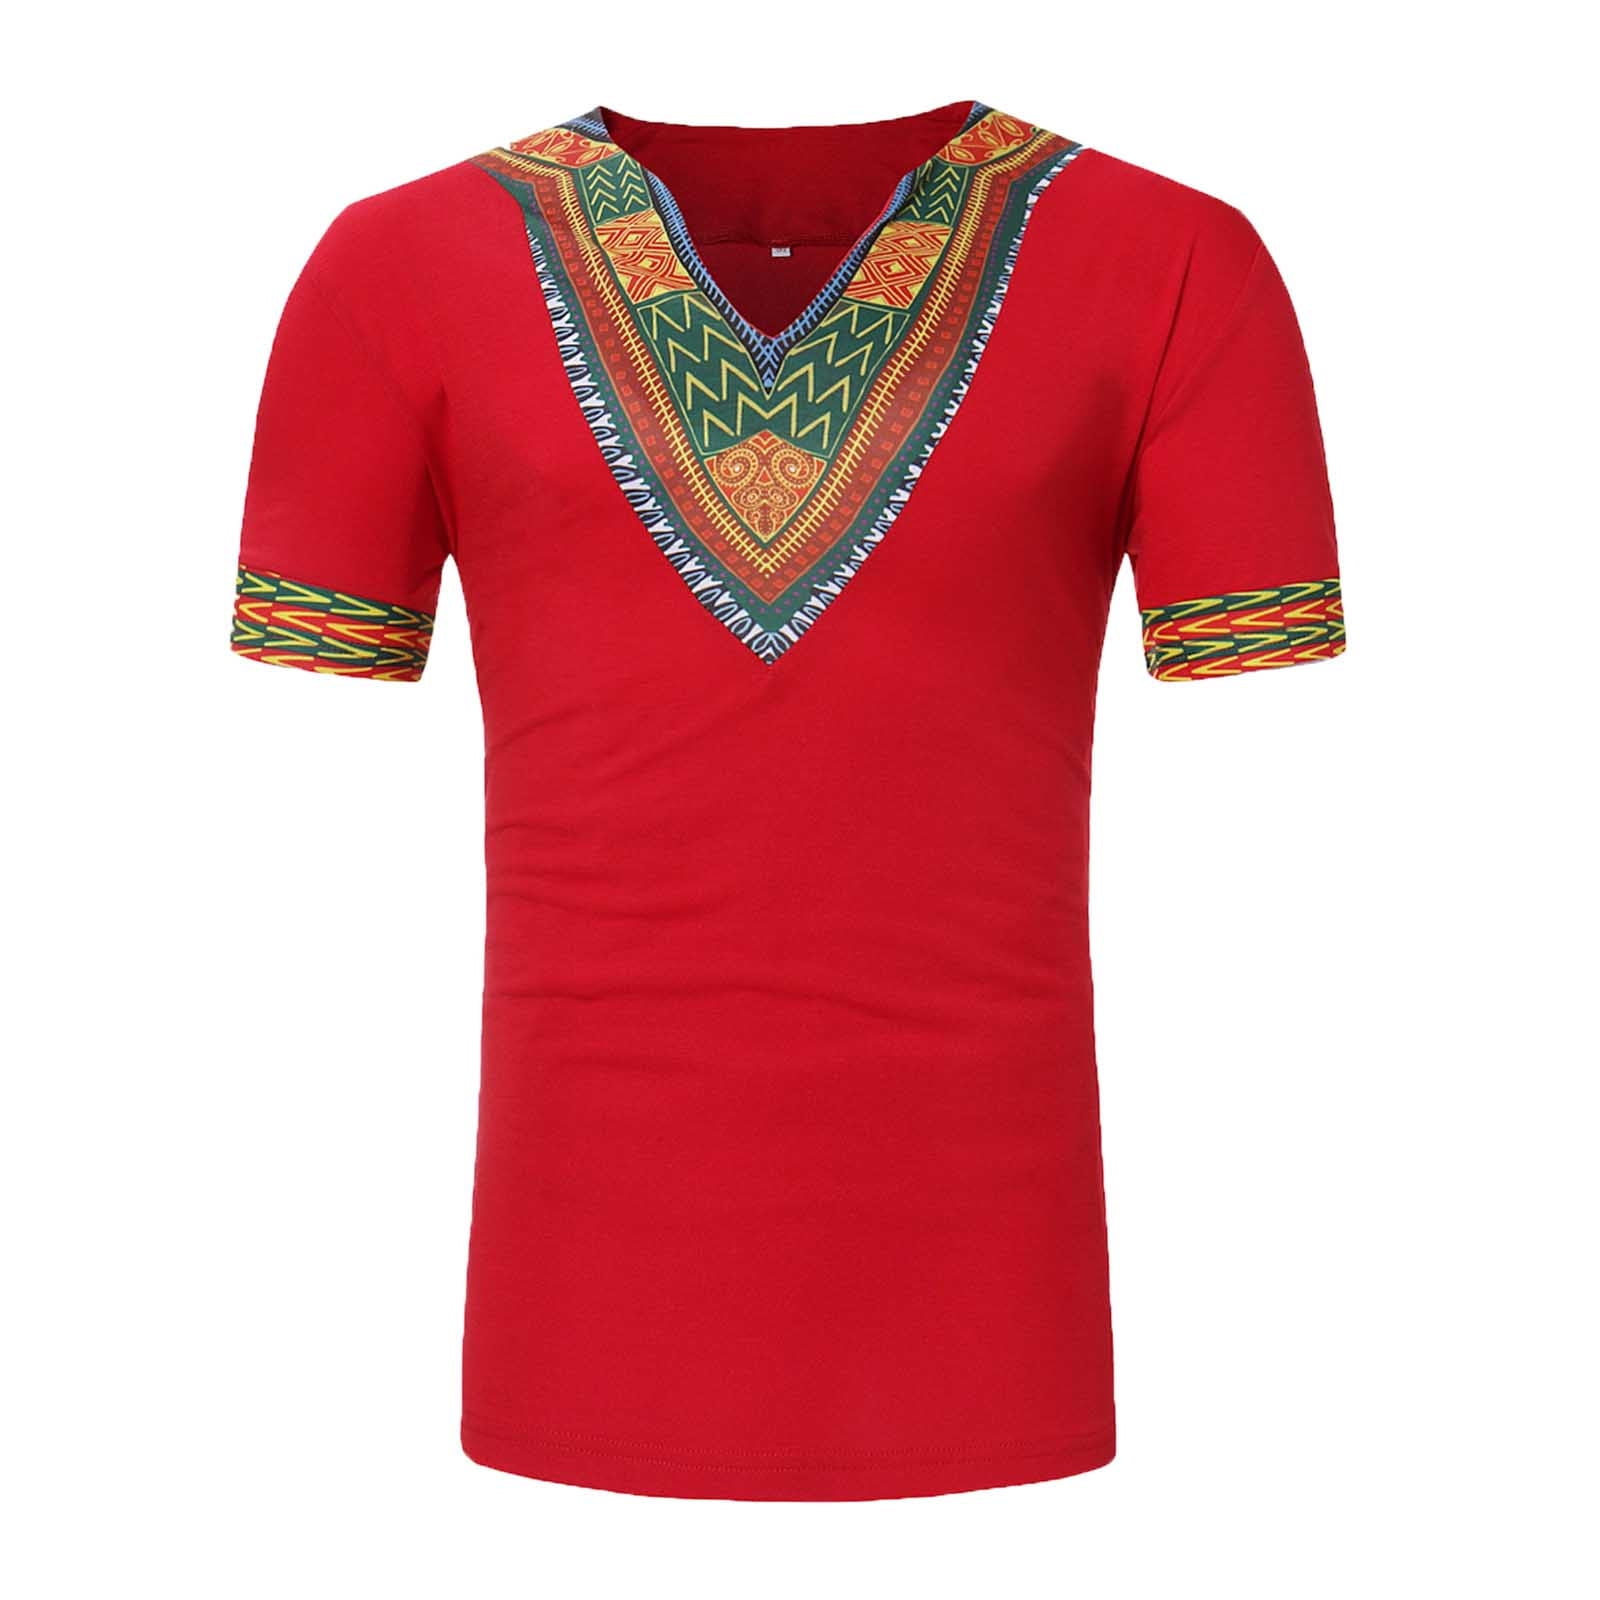 HOOUDO Men Tops Summer Casual Funny African Print O-Neck Short Sleeve Slim Fit Long Shirts Top Blouses Tunic Tee Pullover 